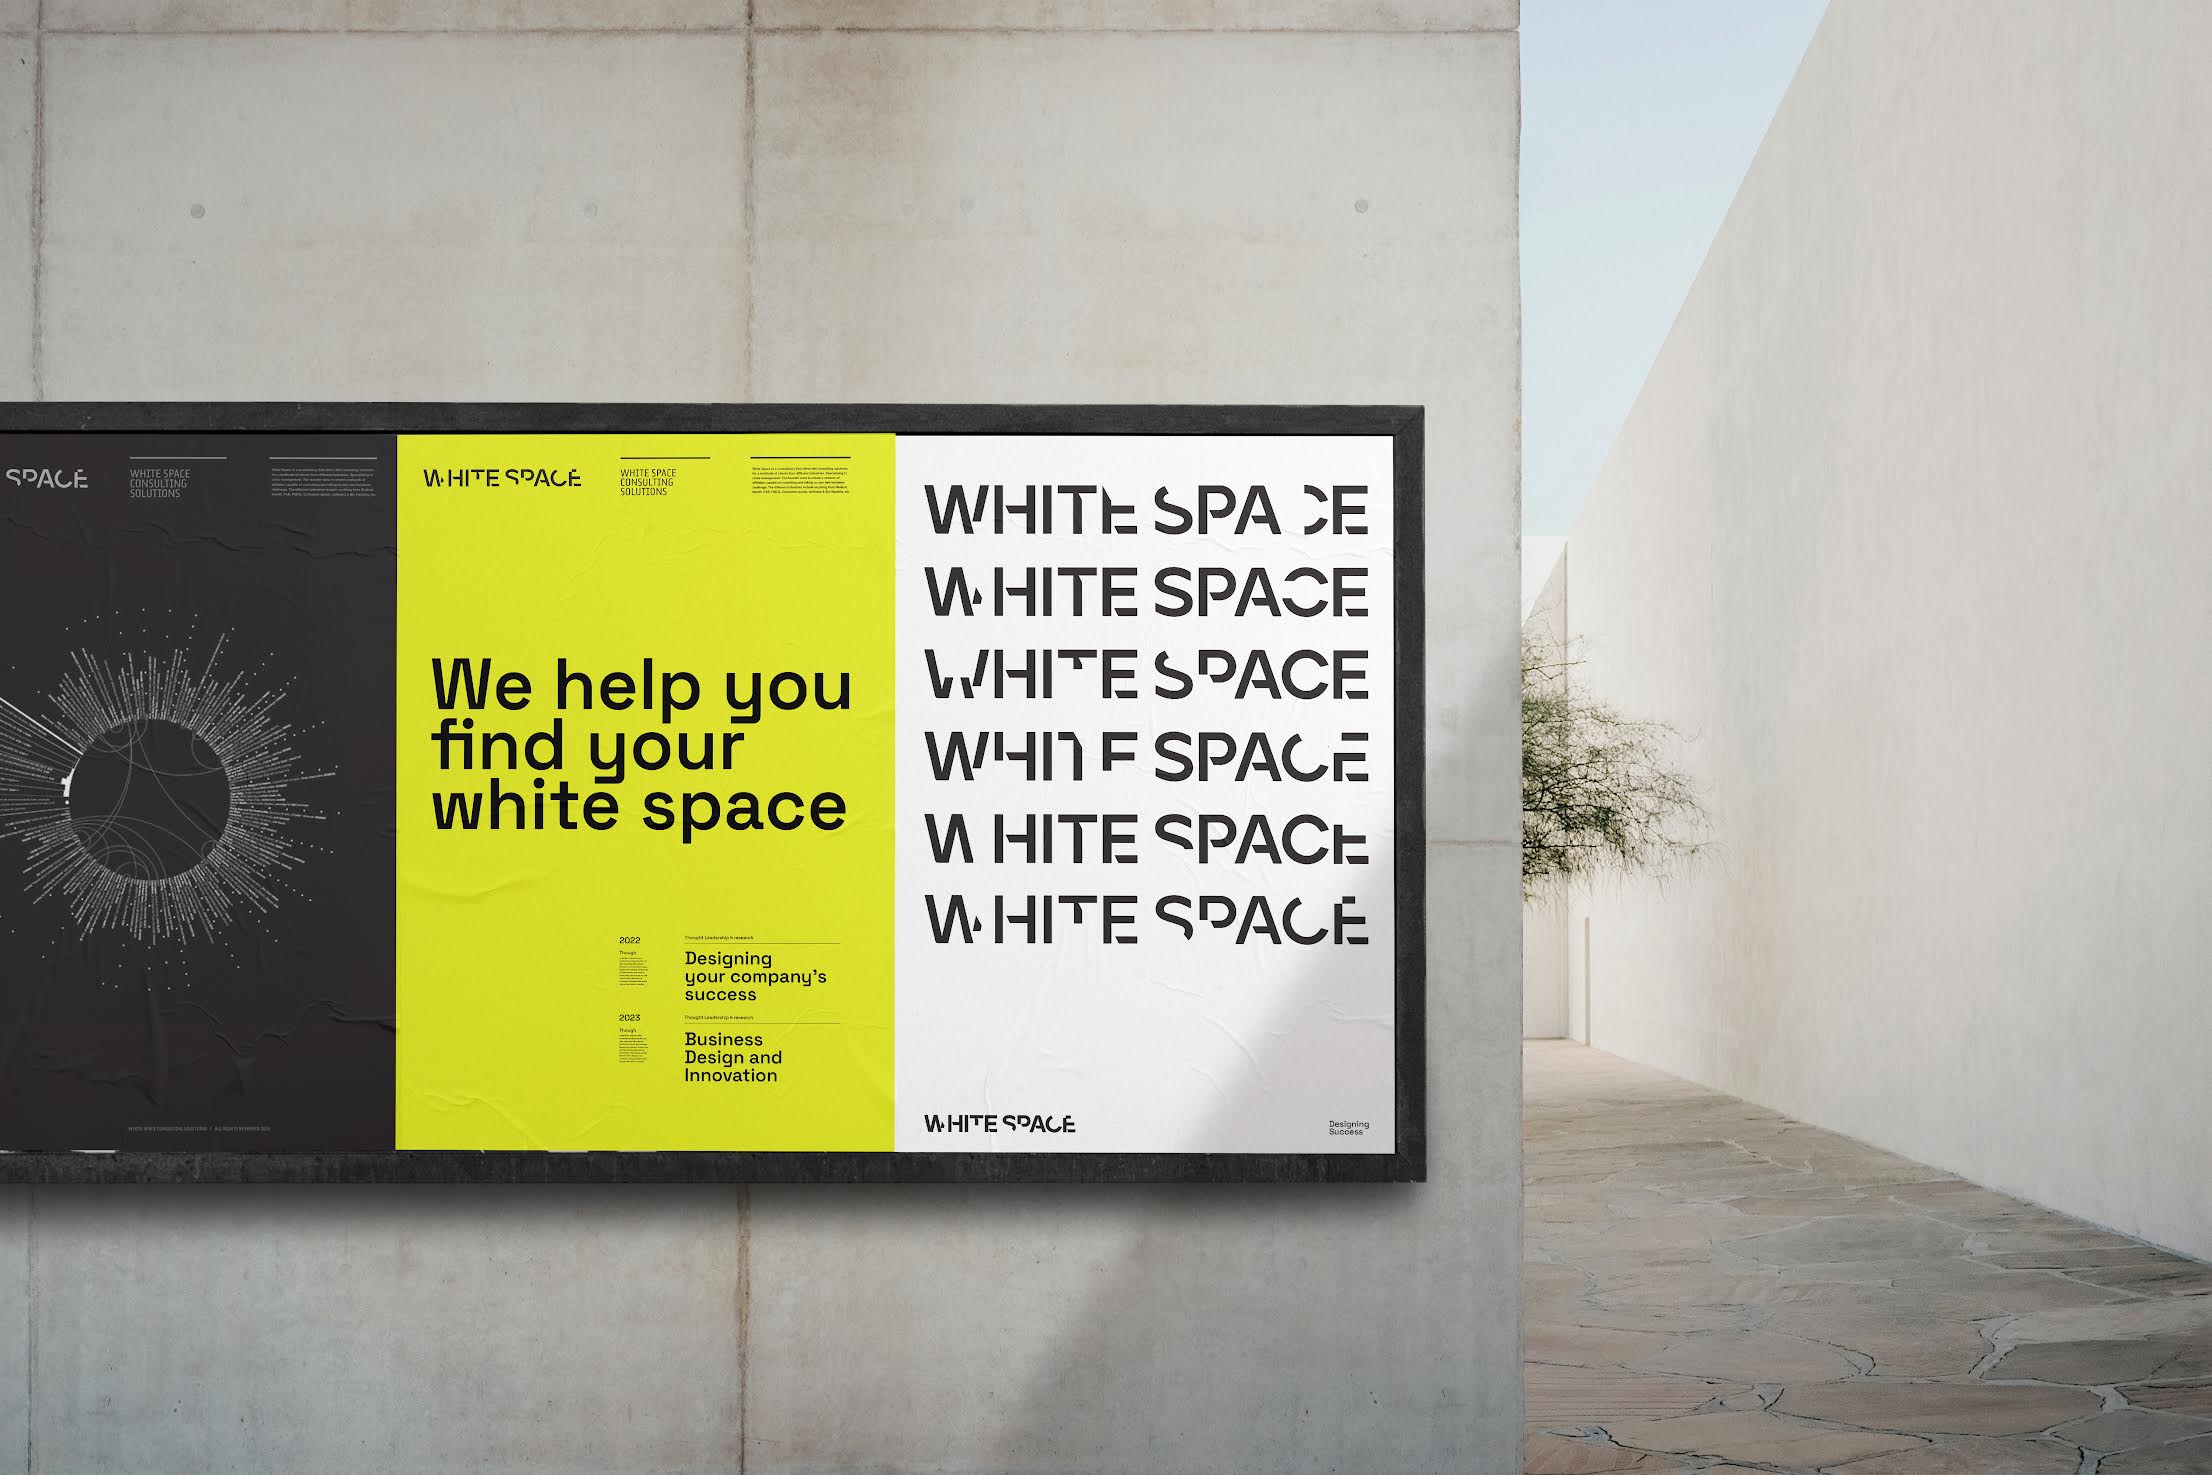 Finding Your WhiteSpace: Crafting The Visual Identity For A Business Design Consultancy